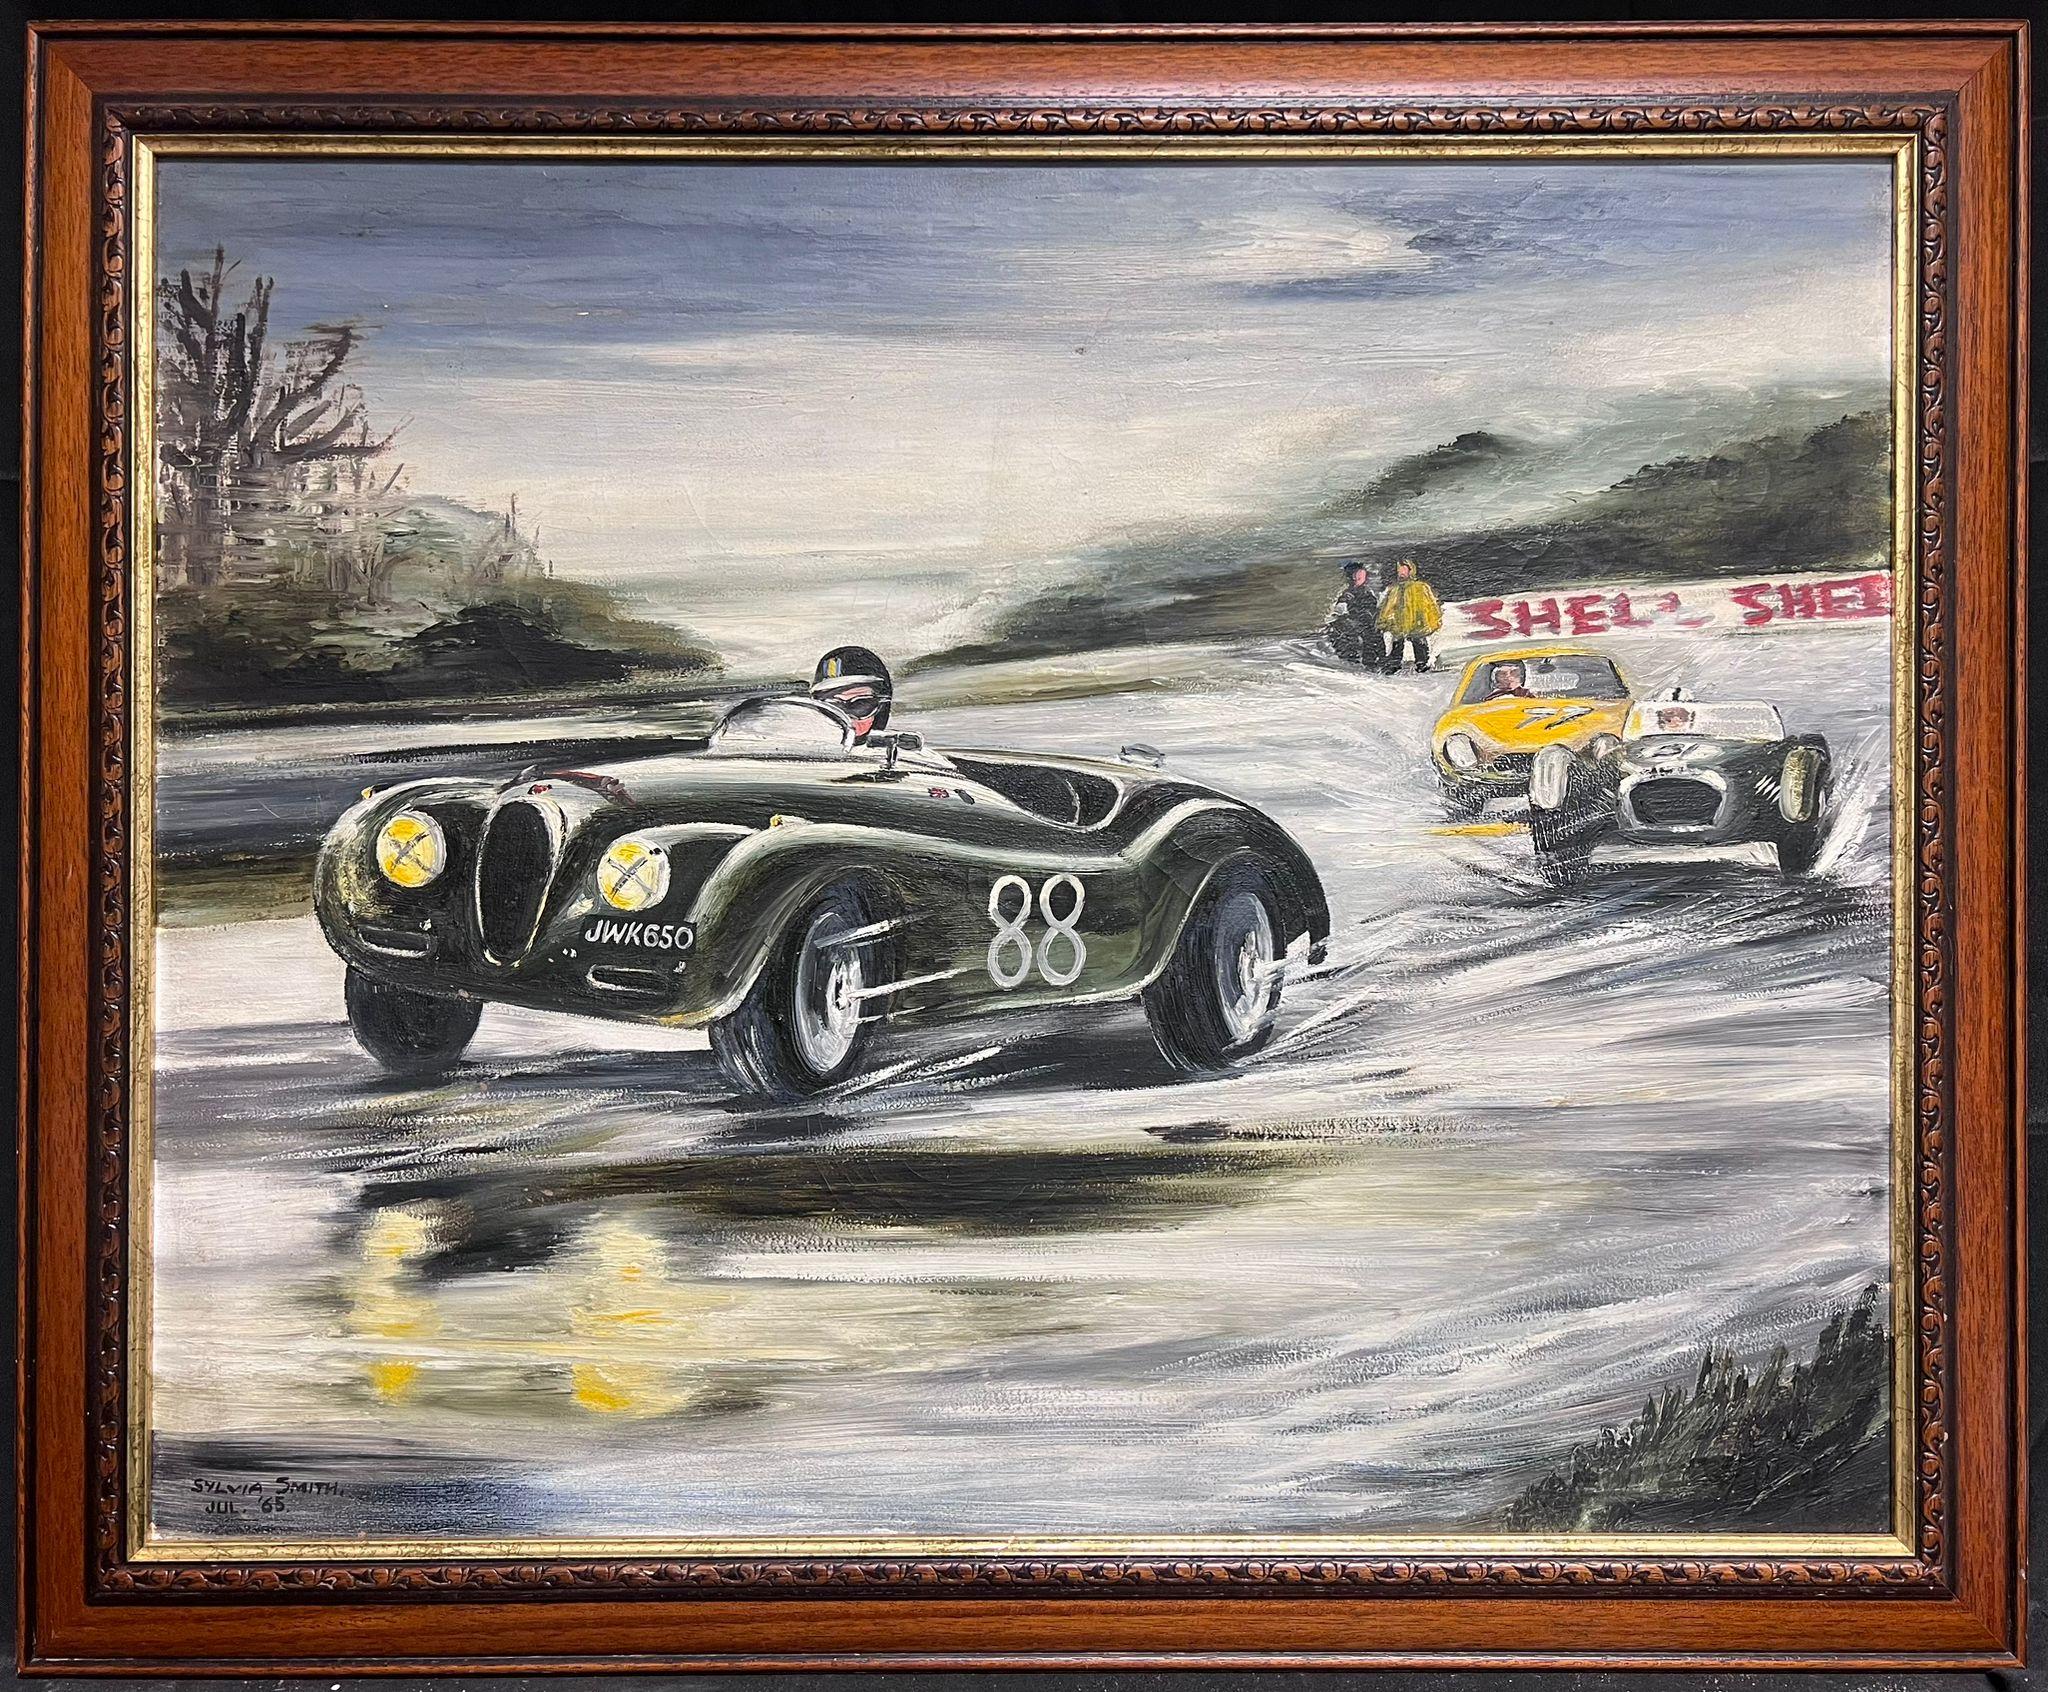 Classic Jaguar Motor Racing Action Scene Original 1960's Signed Oil Painting  - Gray Figurative Painting by British 1960's